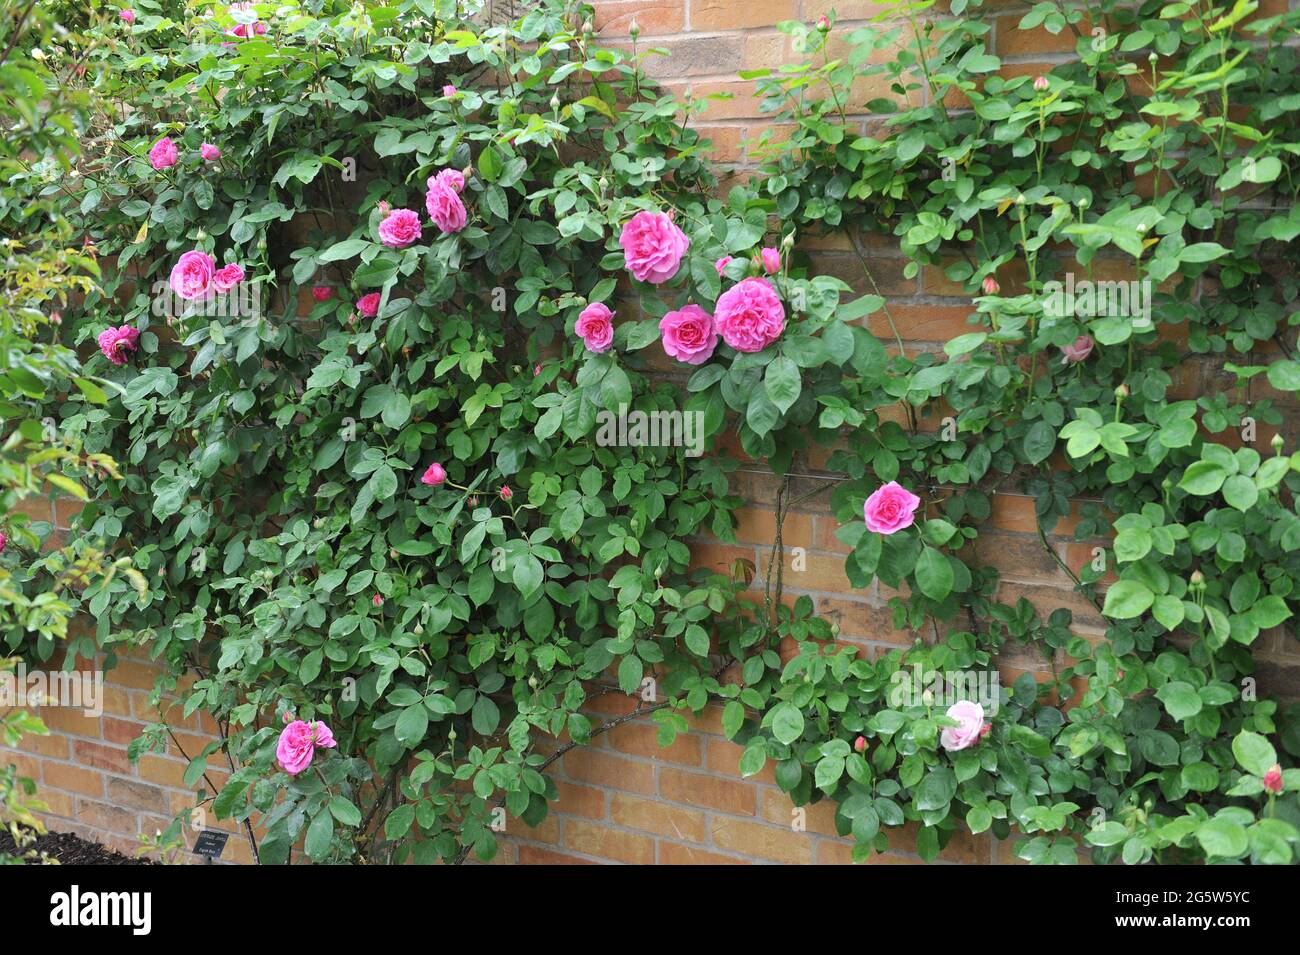 Pink climbing shrub rose (Rosa) Gertrude Jeckyll blooms on a brick wall in a garden in May Stock Photo